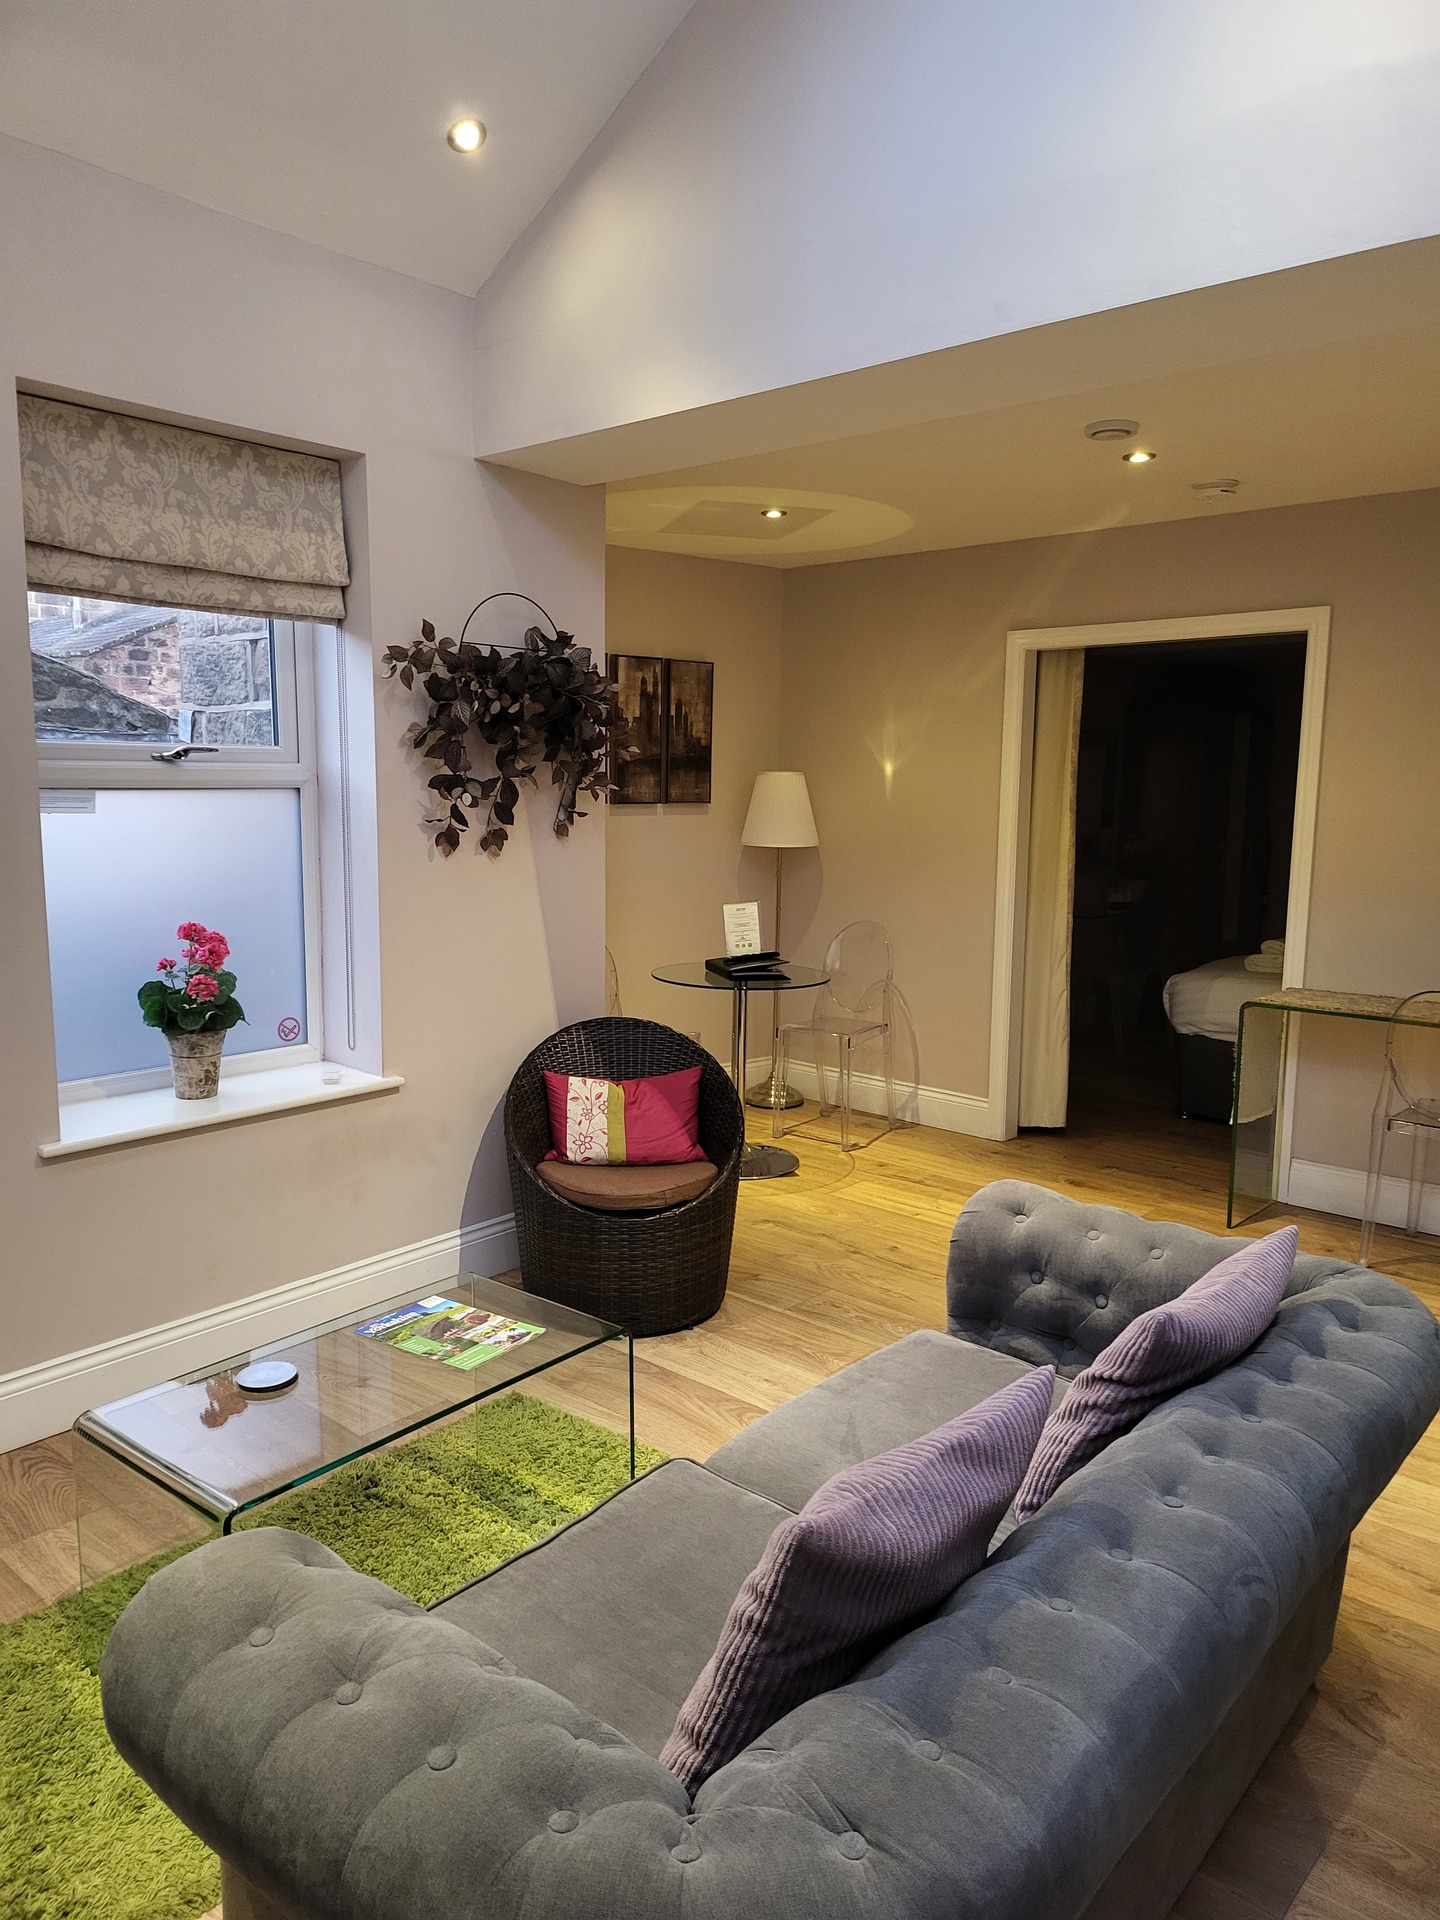 Designed for guests seeking extended stays, Harrogate Lifestyle Luxury Serviced Apartments provide a superior alternative to traditional hotels. The apartments offer Studio, 1, and 2-bedroom options, ensuring ample space and privacy for every guest.